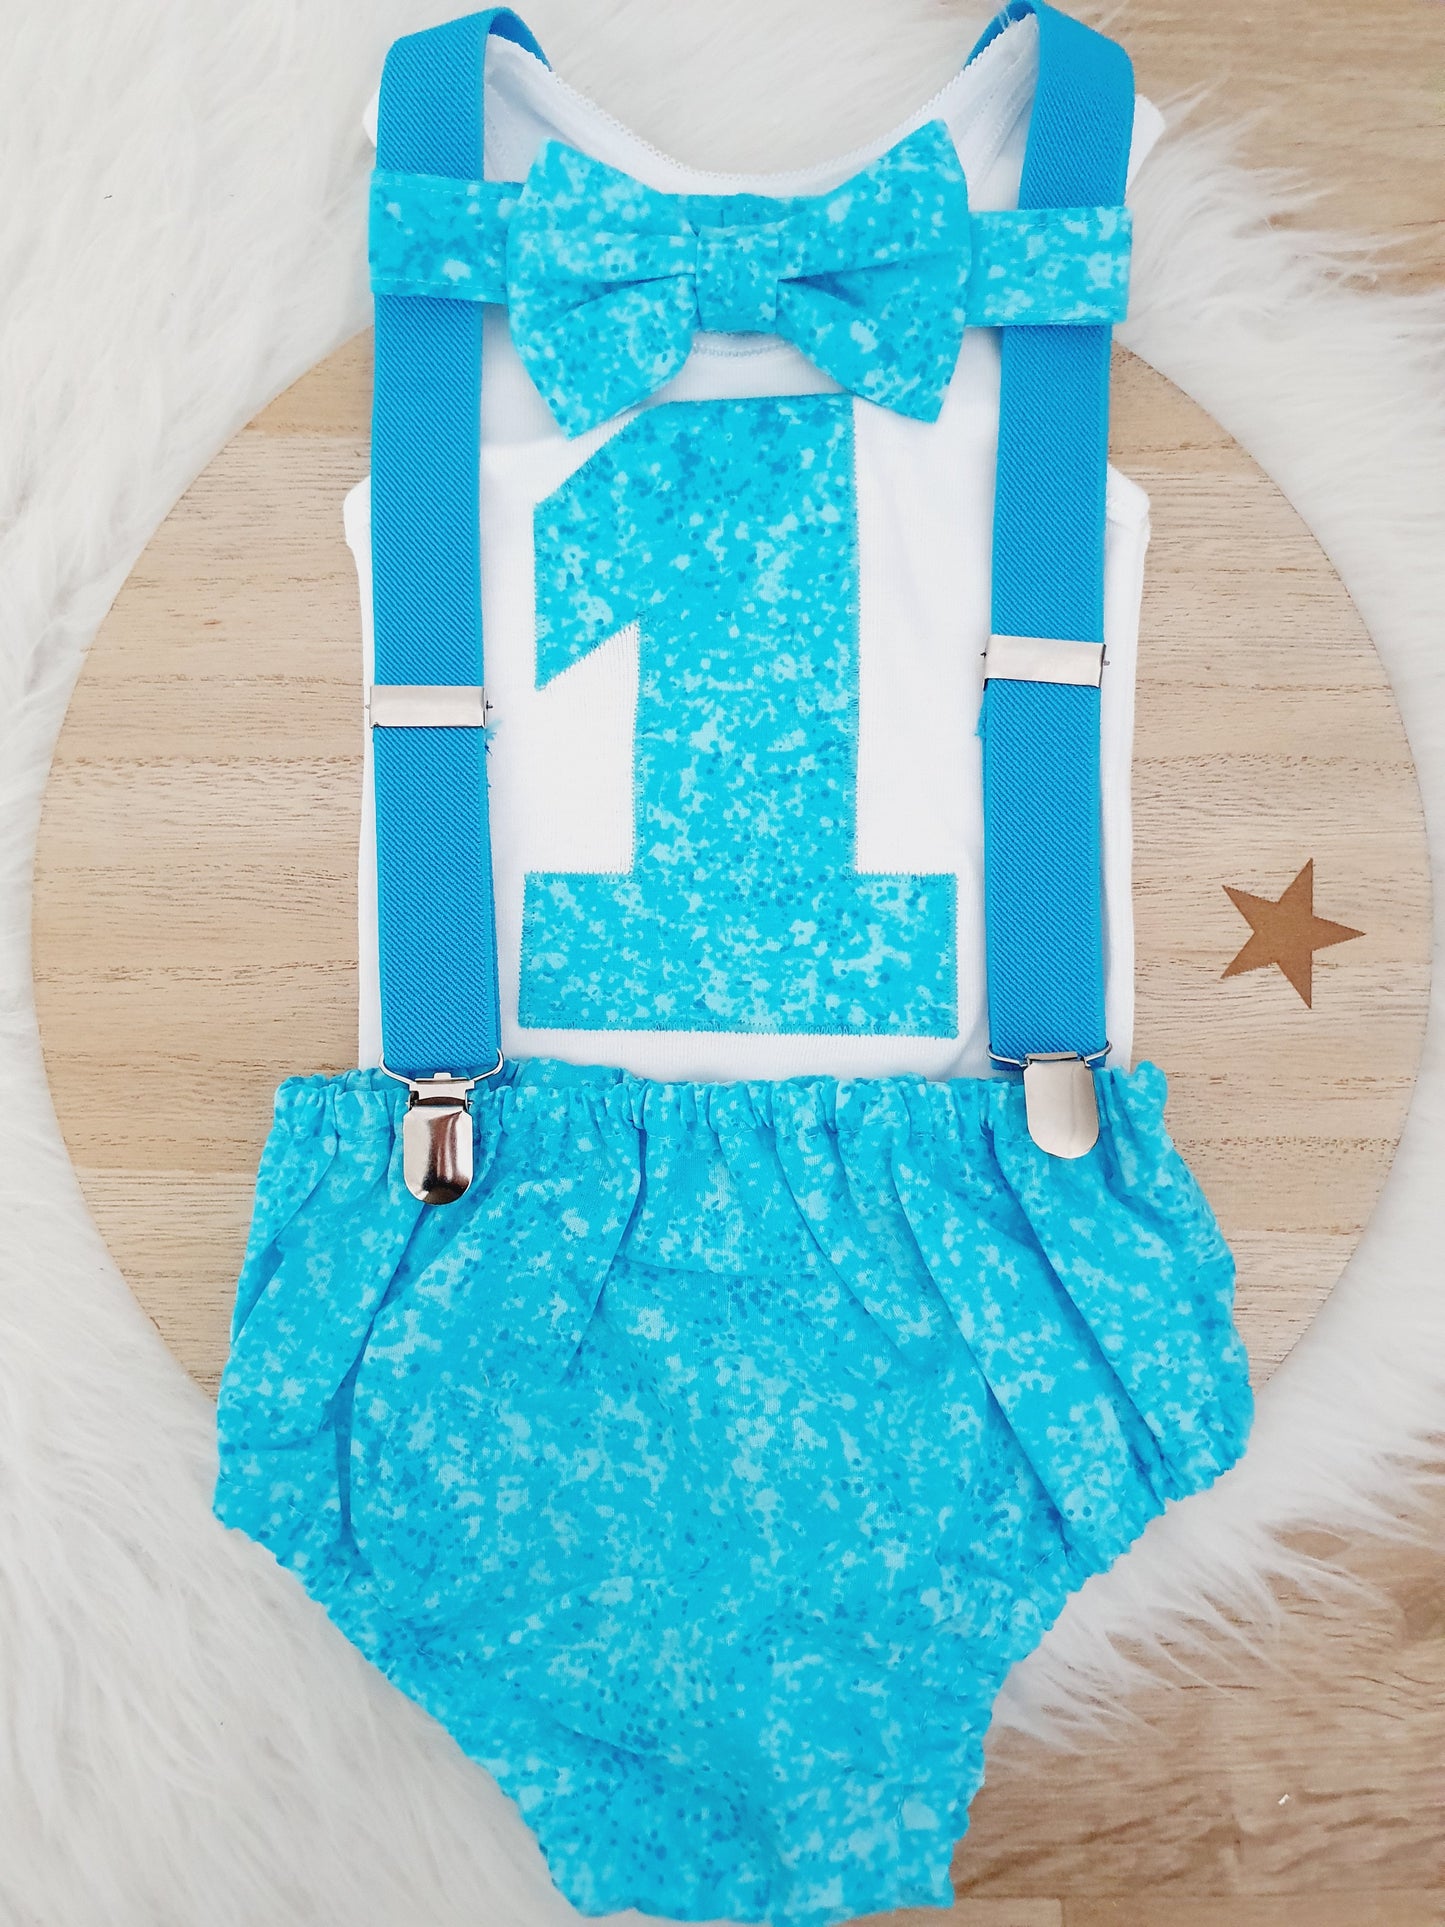 Blue Boys 1st Birthday Outfit - Cake Smash Outfit - Baby Boys Birthday Photoshoot Clothing, Size 0, Nappy Cover, Tie, Singlet & Suspenders Set - AQUA SPECKLE